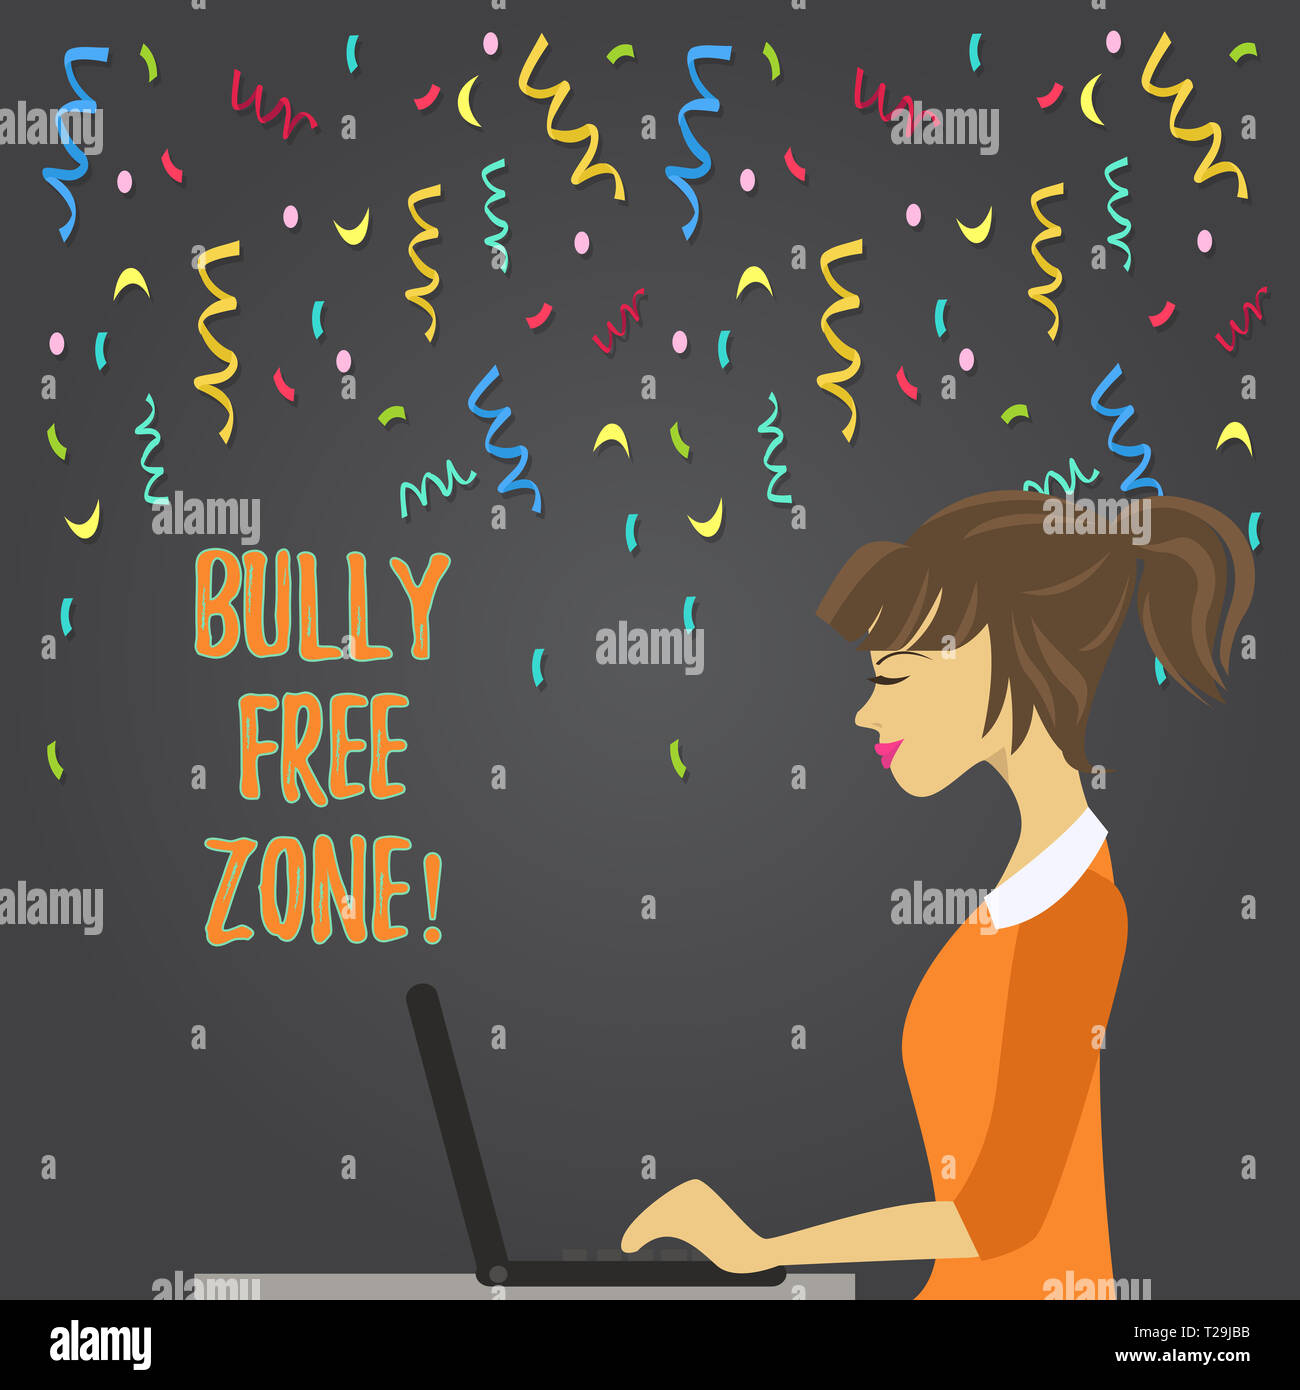 https://c8.alamy.com/comp/T29JBB/conceptual-hand-writing-showing-bully-free-zone-concept-meaning-creating-abuse-free-school-college-life-strip-size-lined-paper-sheet-hanging-using-bl-T29JBB.jpg